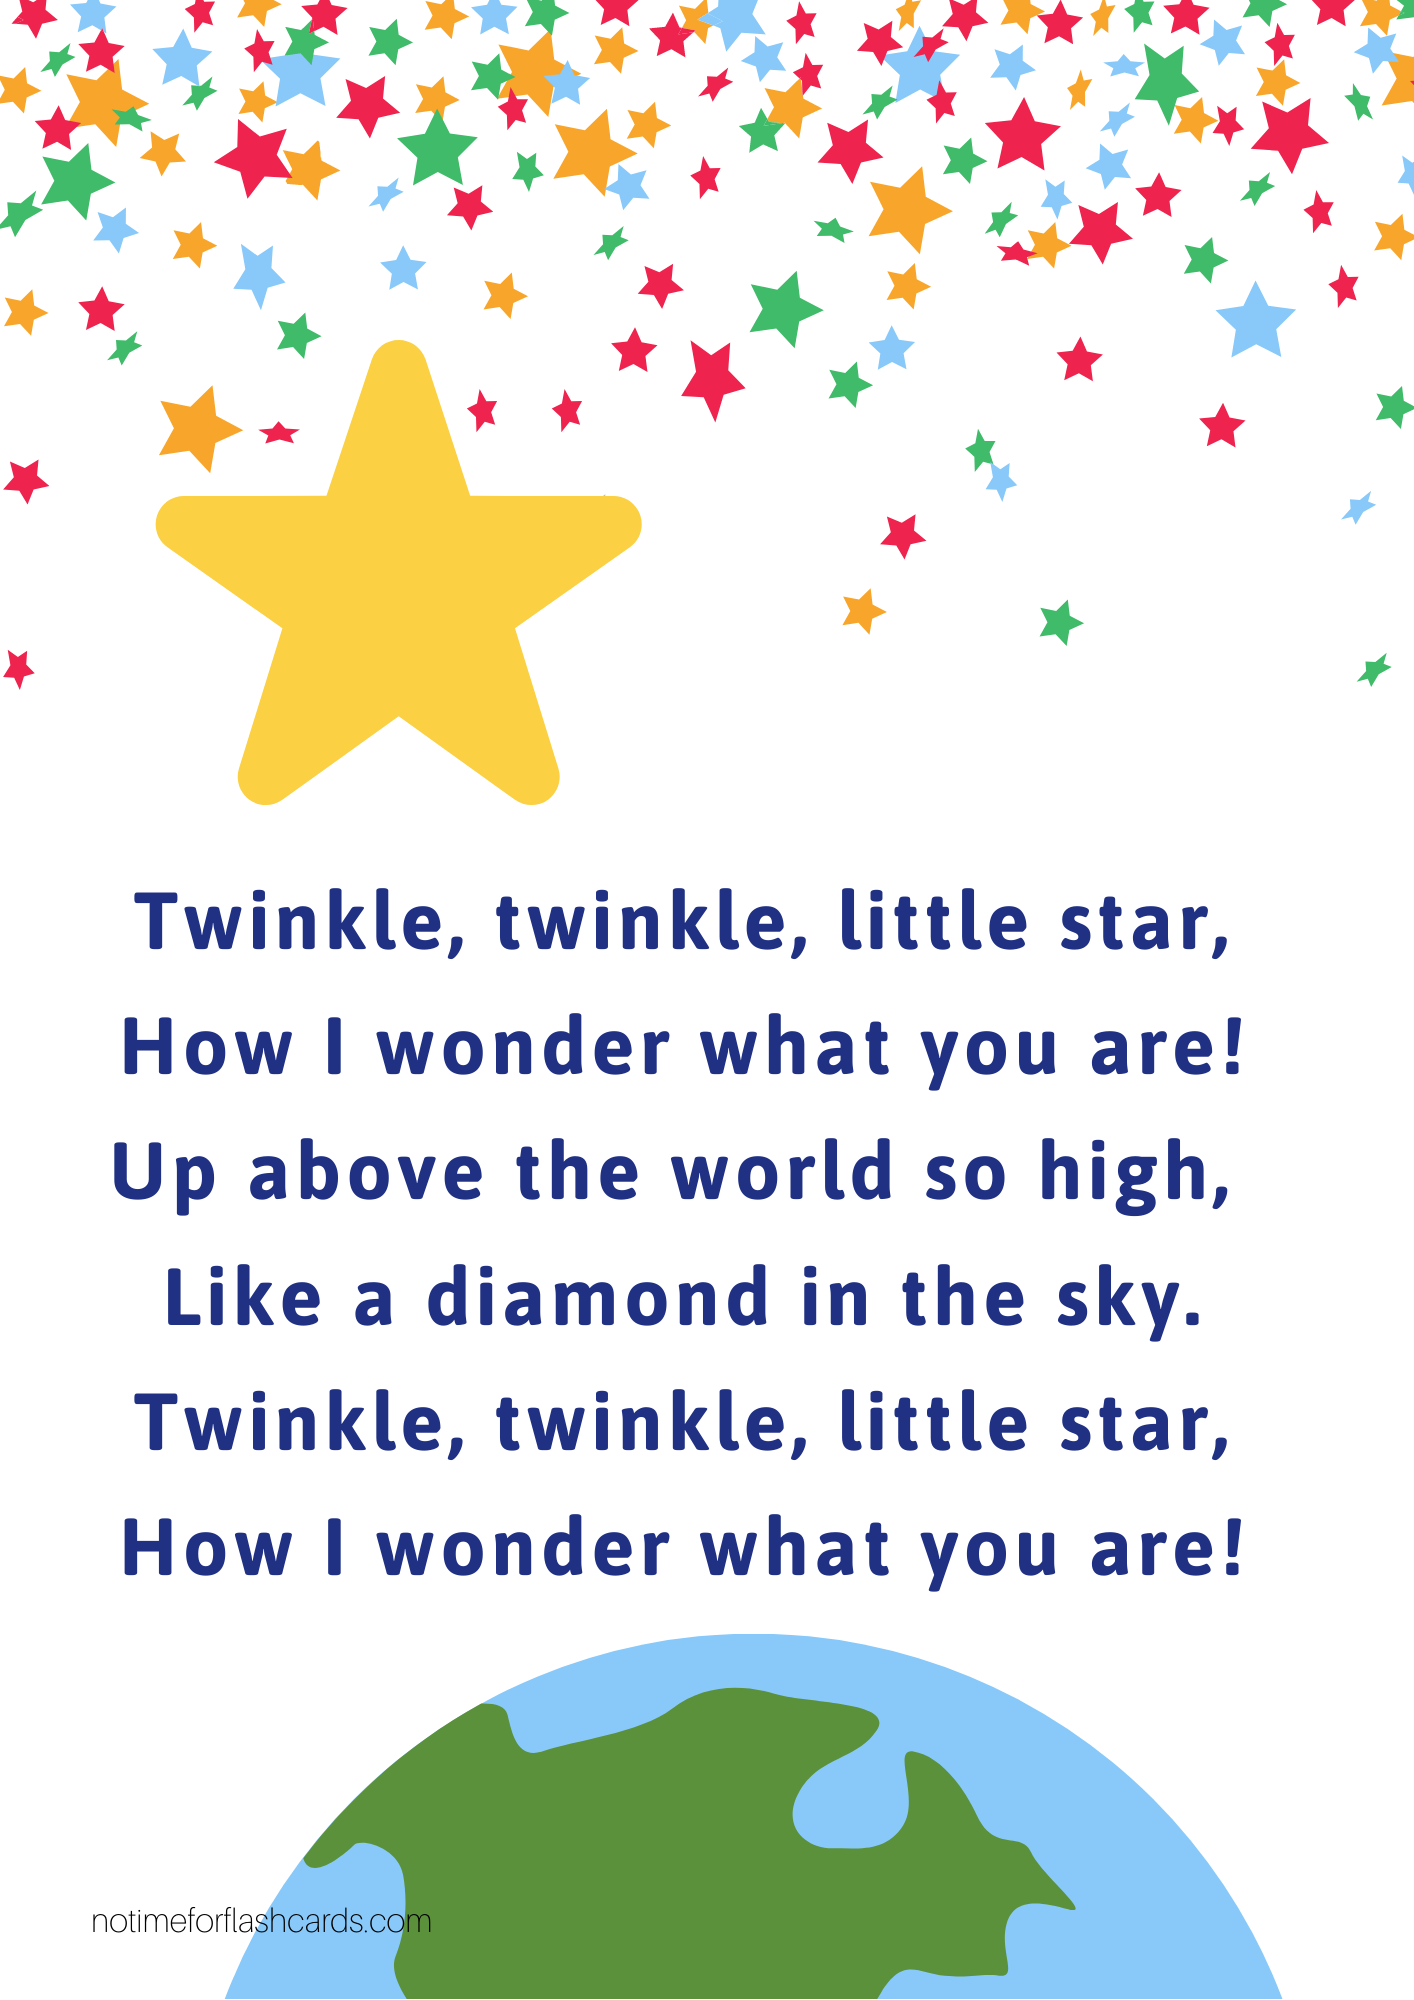 https://www.notimeforflashcards.com/wp-content/uploads/2020/03/free-Twinkle-twinkle-little-star-lesson-plan-printable-pack-preschool.png